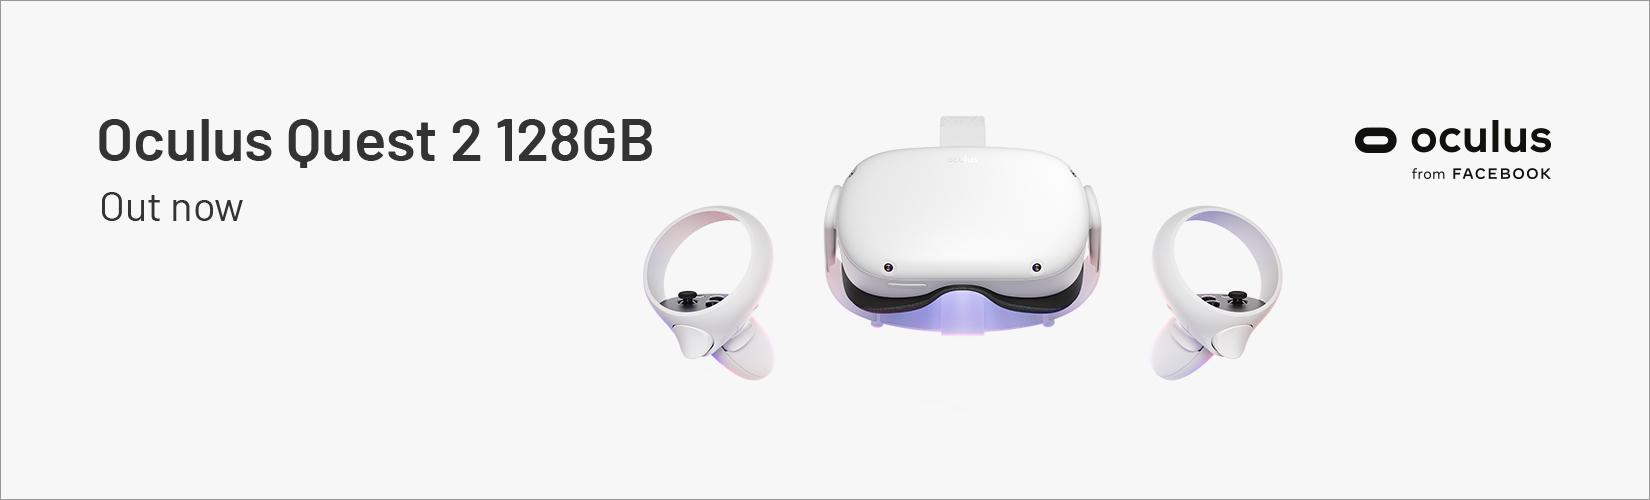 Oculus Quest 2 128GB. Out now.